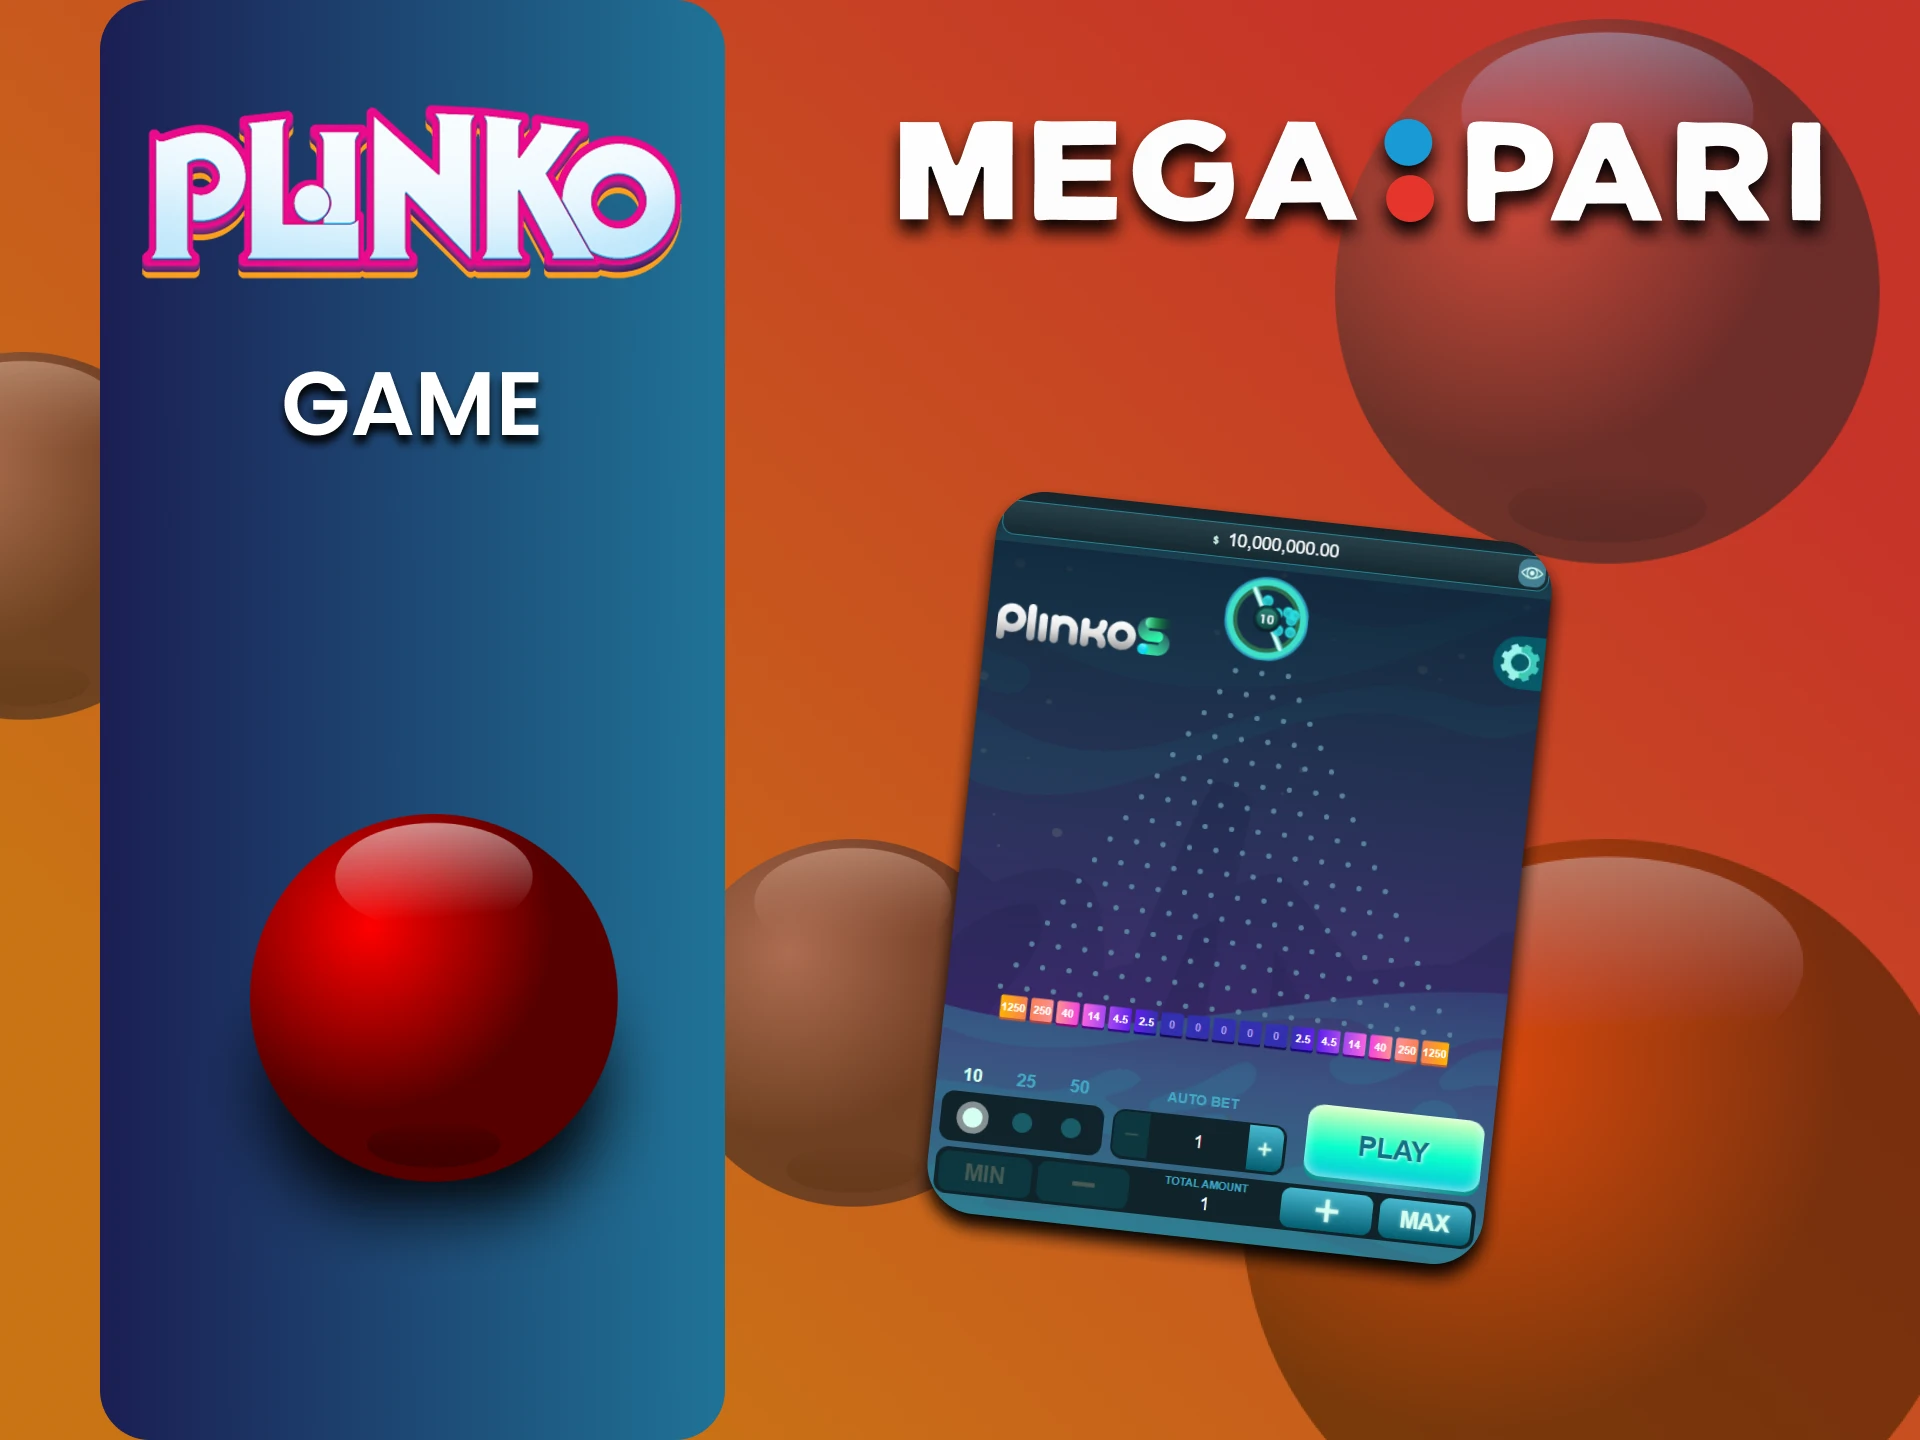 Find out all about Plinko at Megapari.